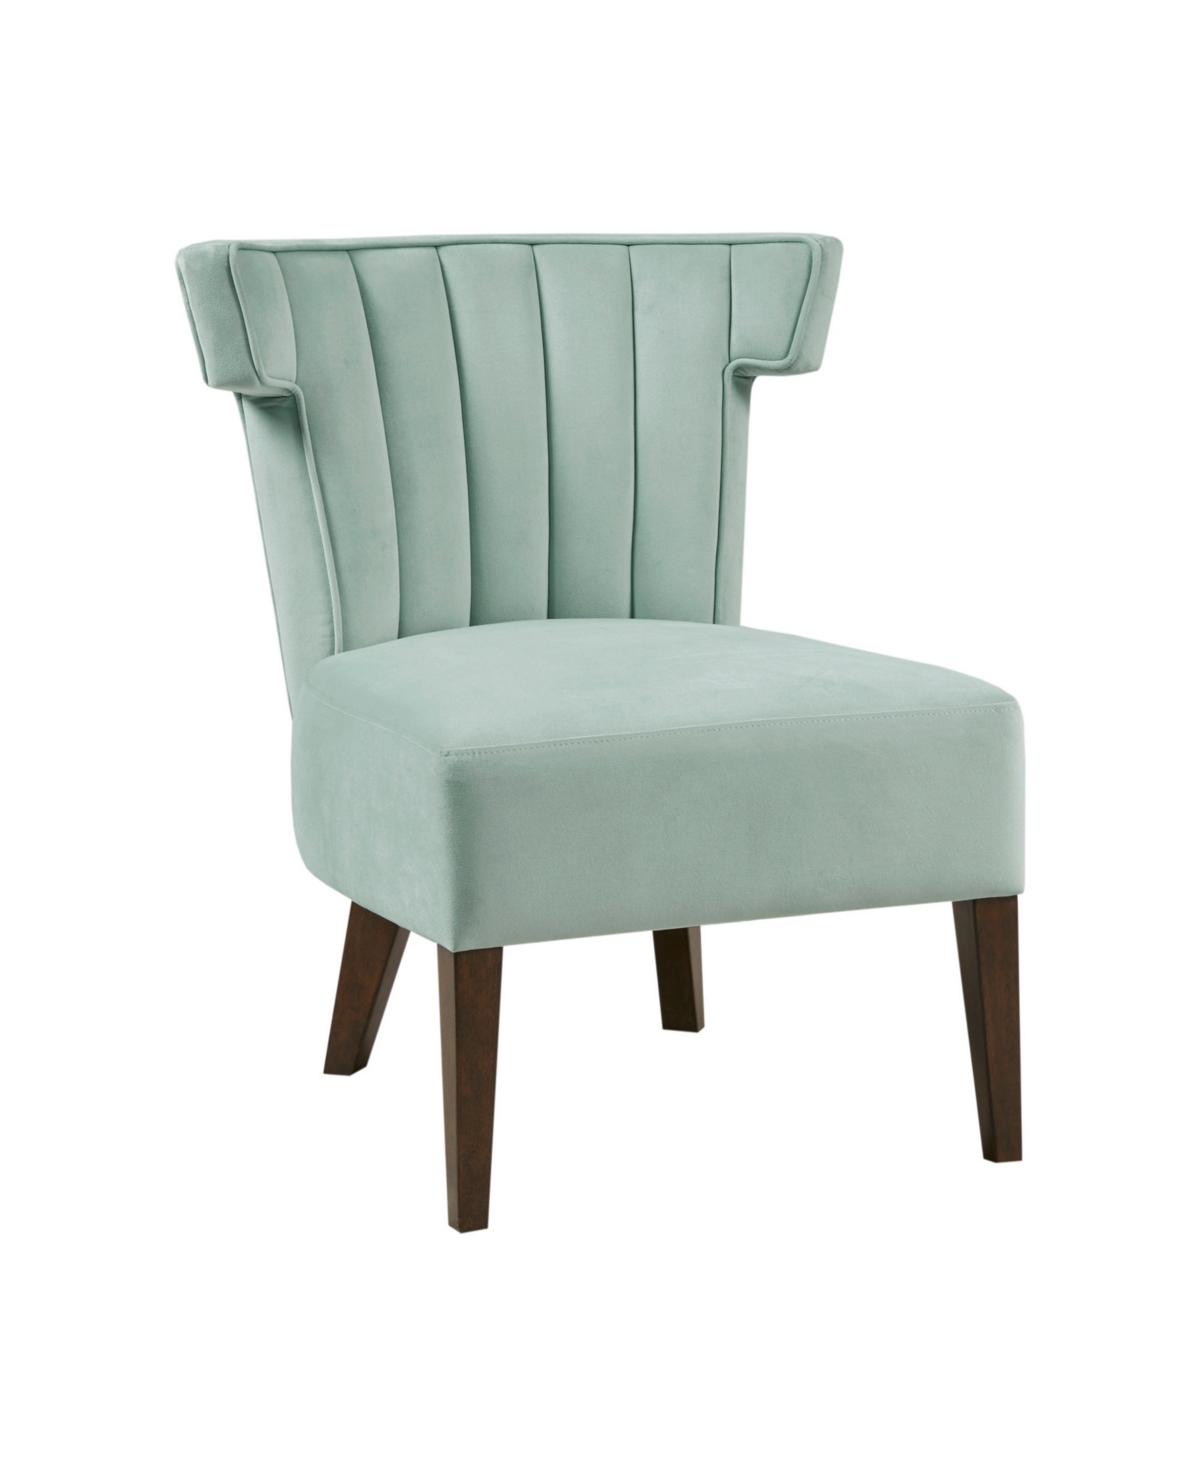 Shop Madison Park Grafton 27.5" Fabric Armless Accent Lounge Chair In Seafoam